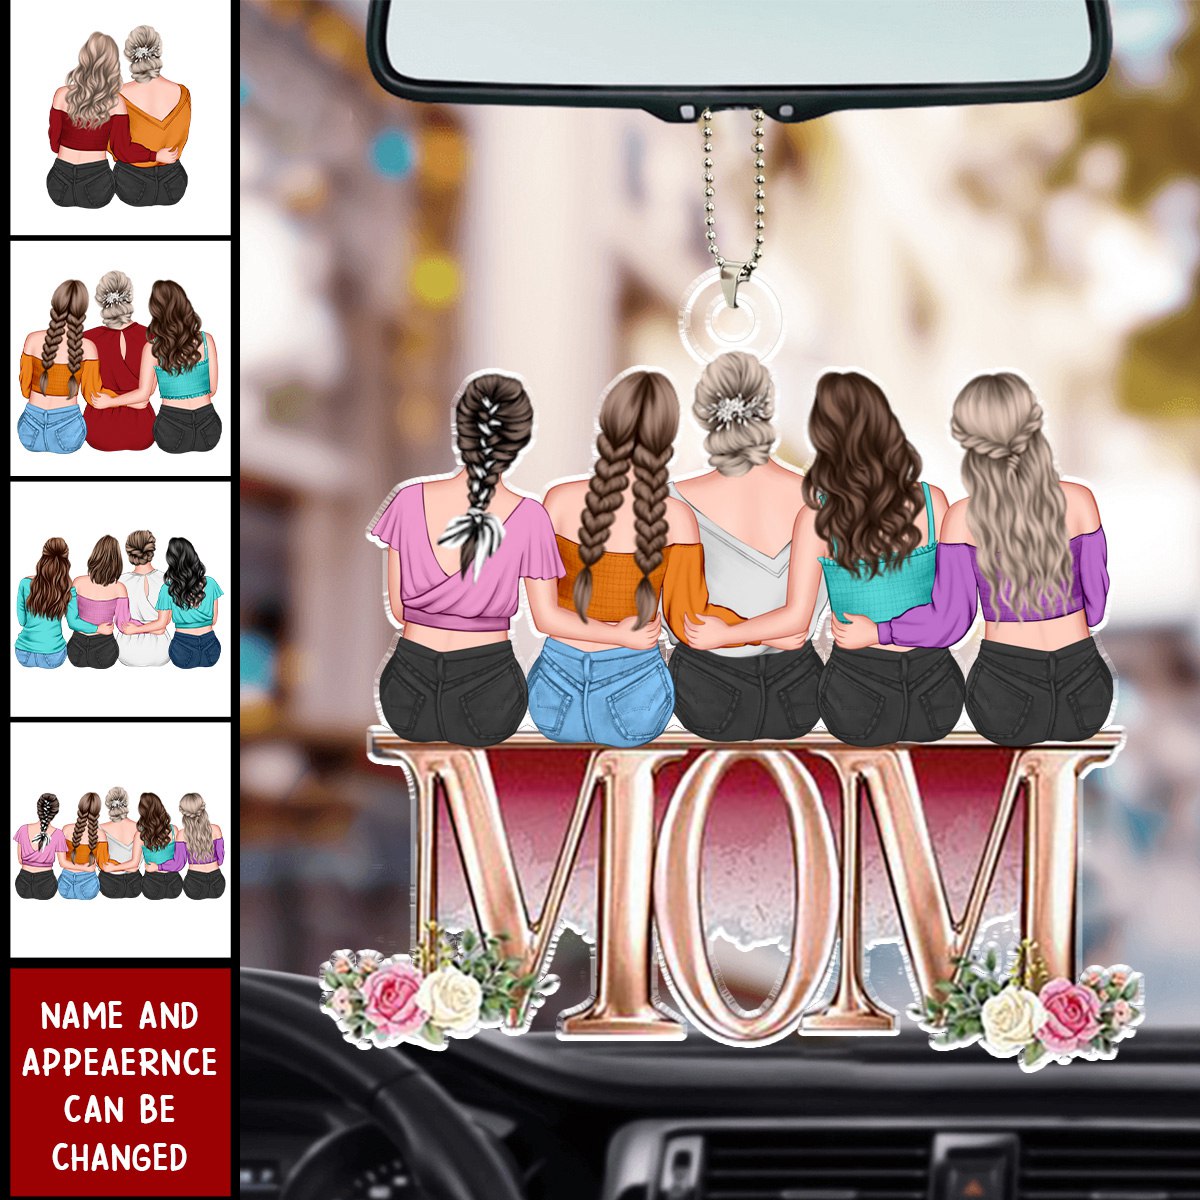 Mom Sat With Us - Personalized Car Ornament